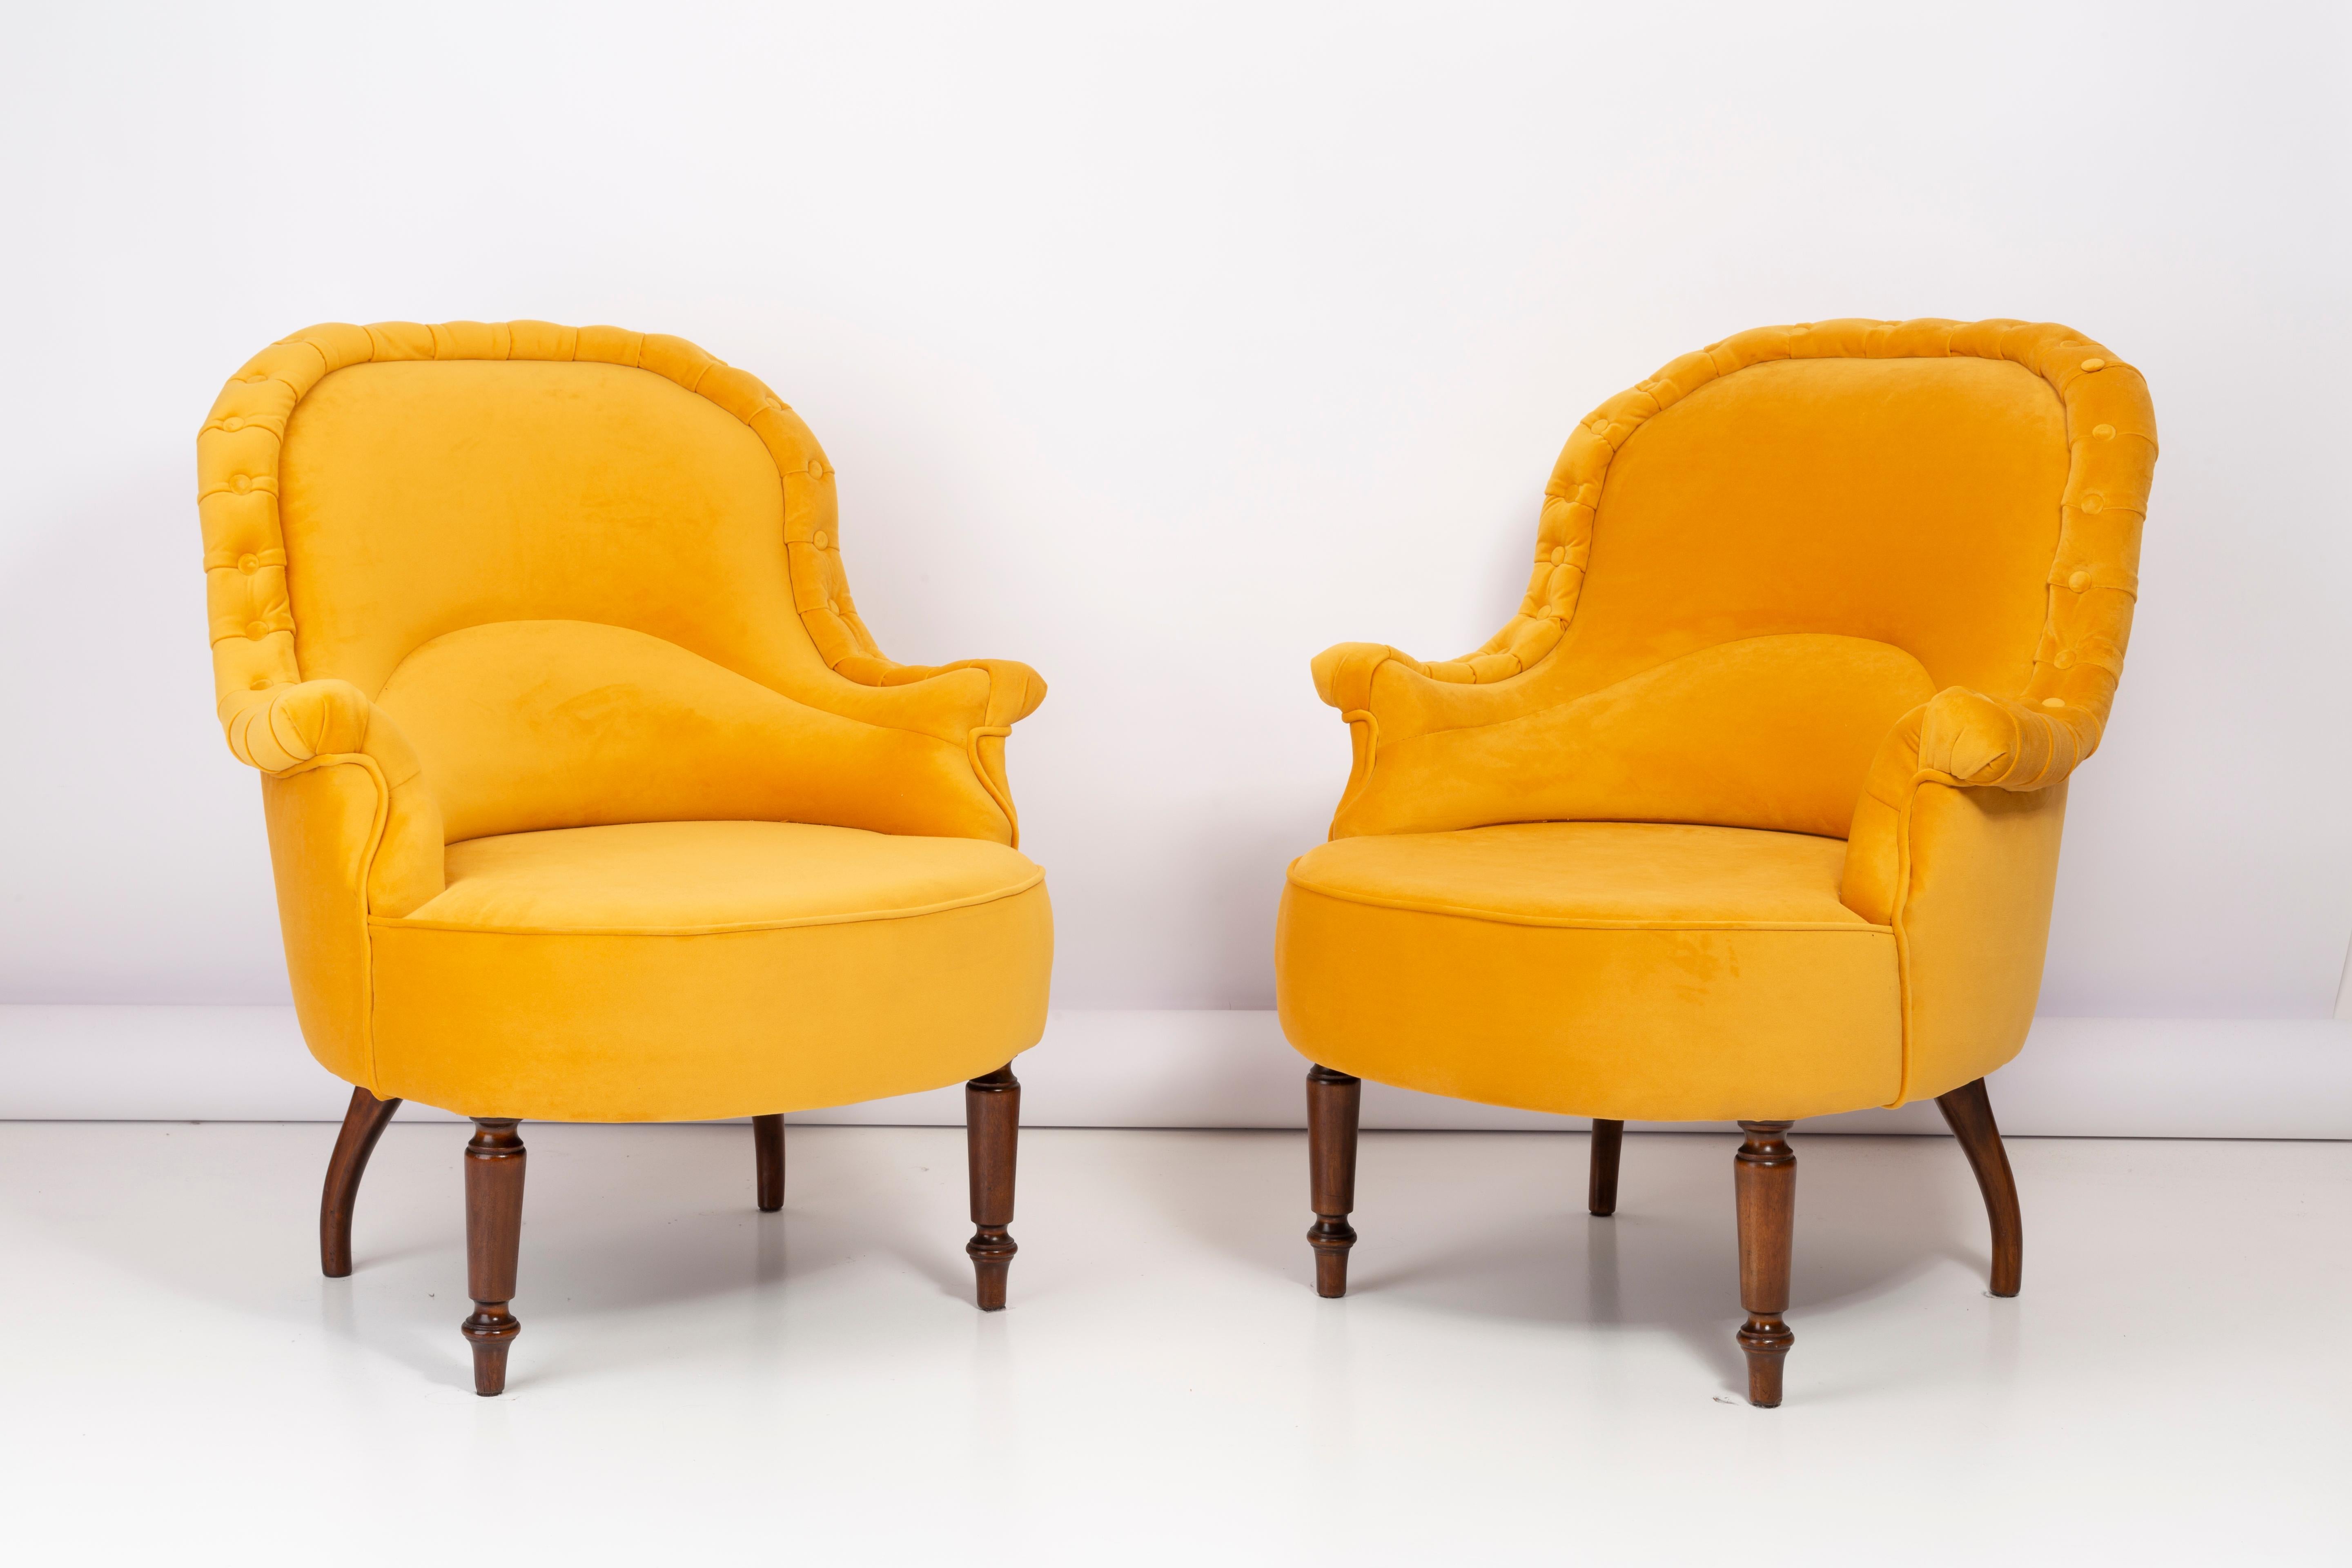 German armchairs and sofa produced in the 1930s in Berlin. The set is after a thorough renovation of upholstery and carpentry. The wooden legs are thoroughly cleaned and covered with a semi-matte varnish in the color of a nut. The upholstery is made